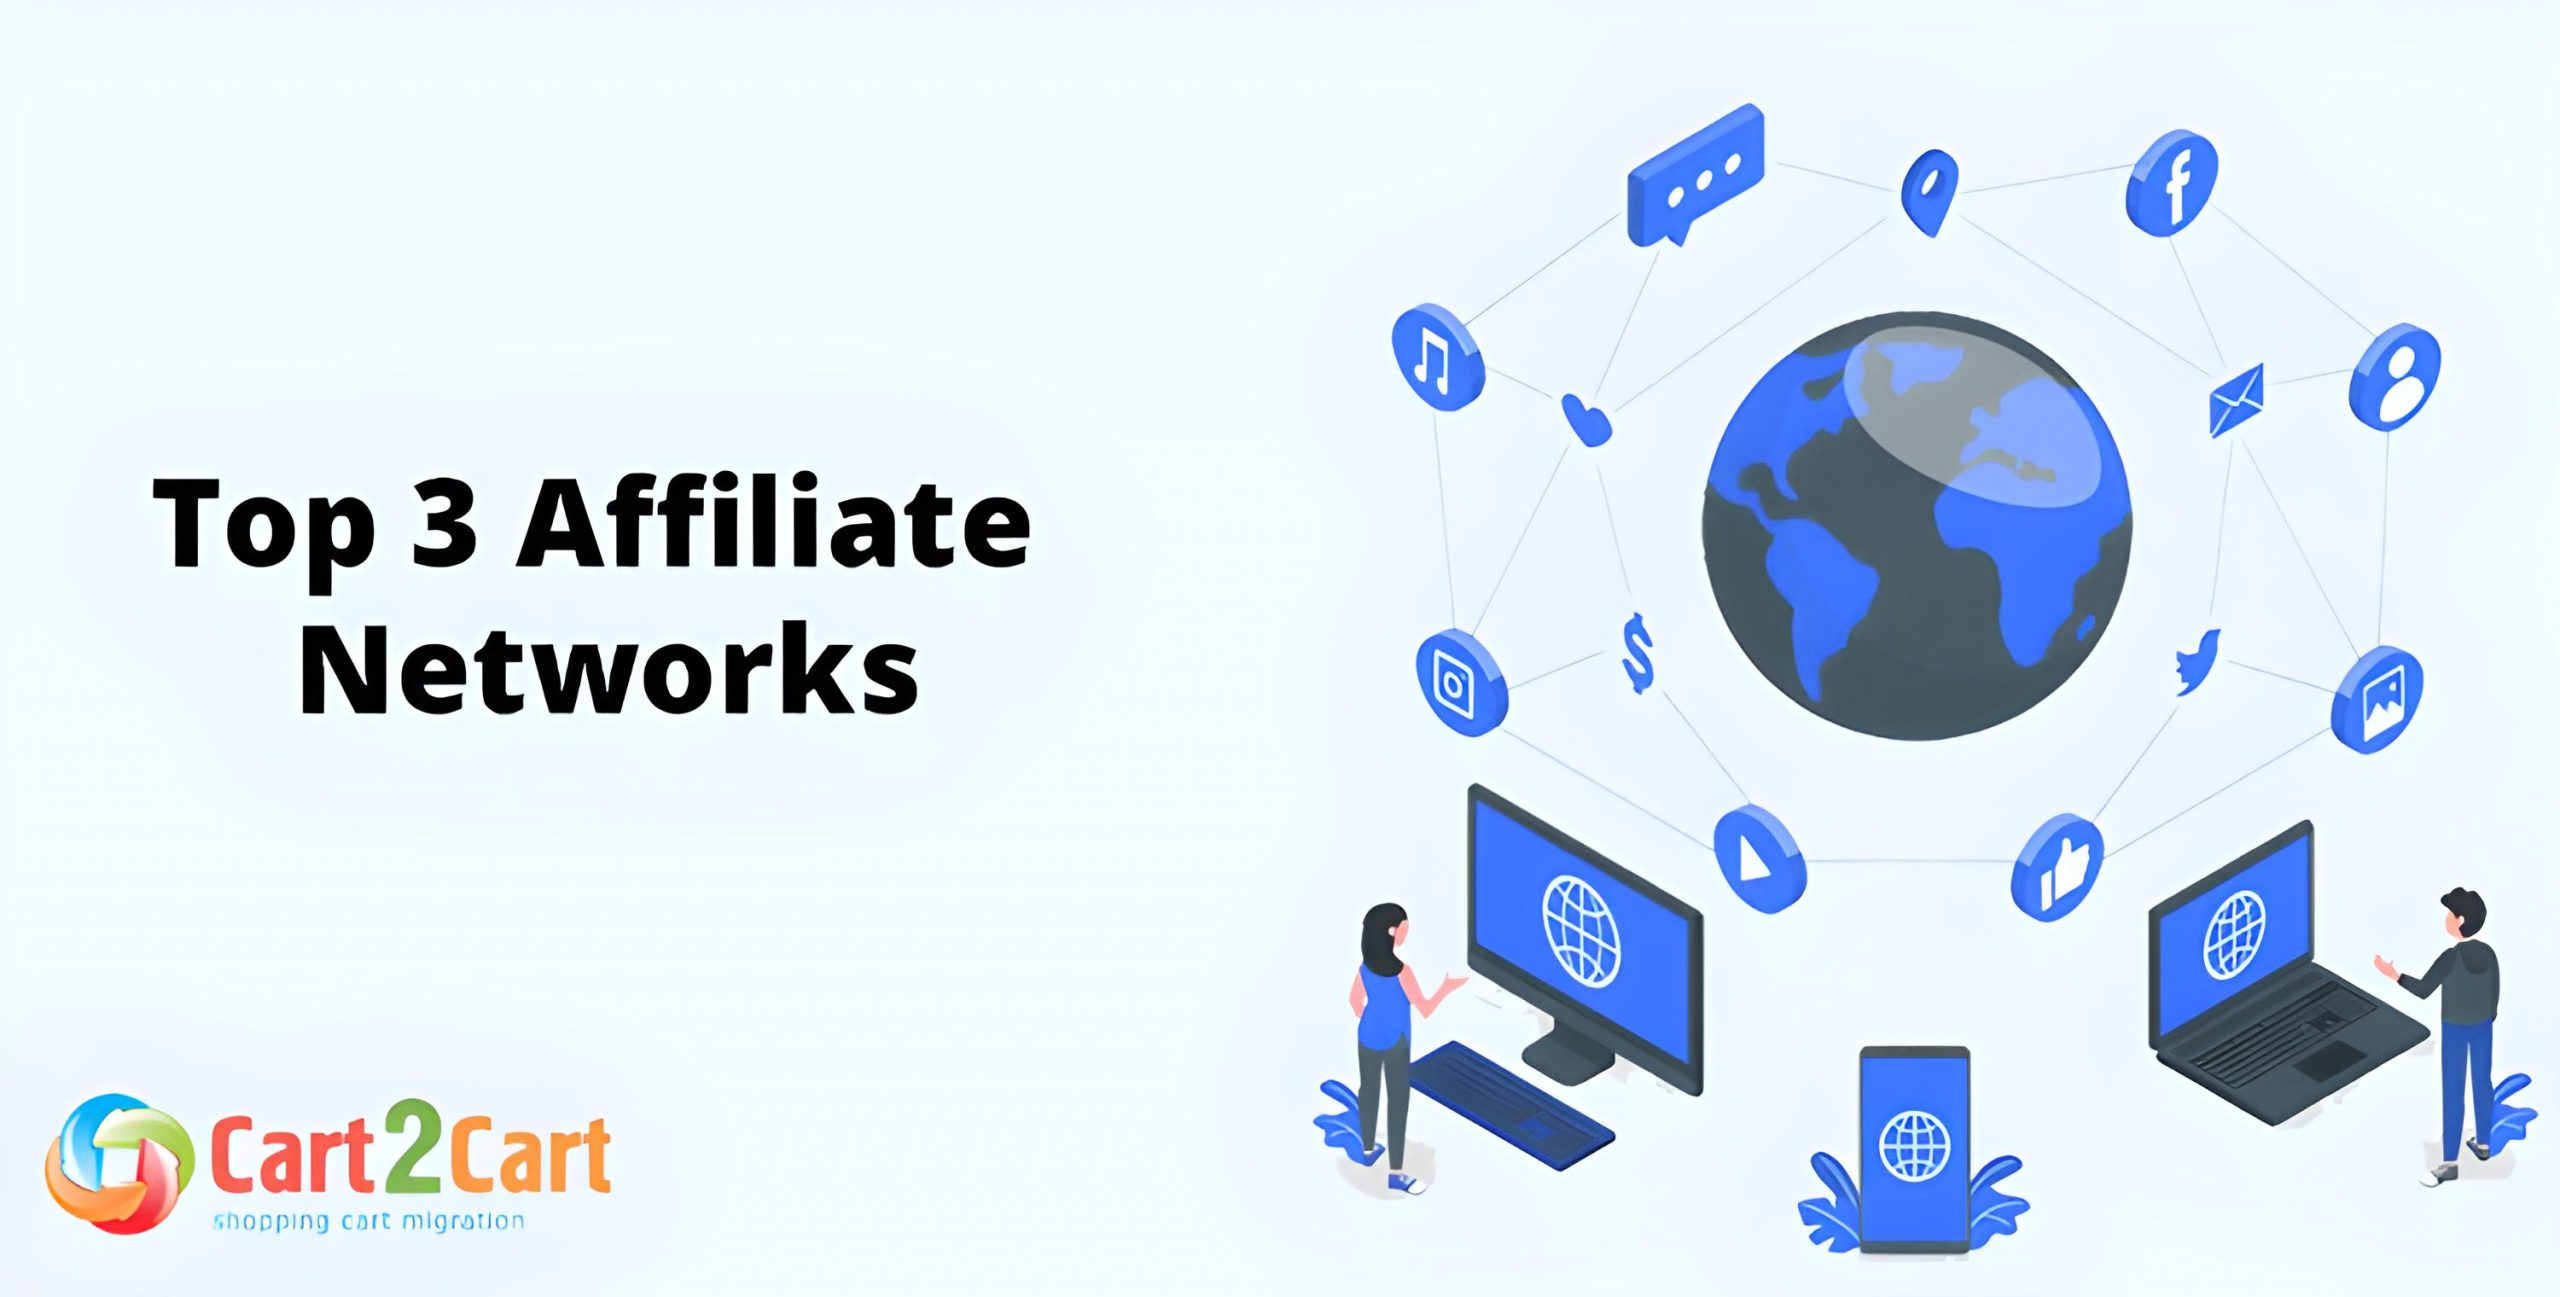 Top 3 Affiliate Networks